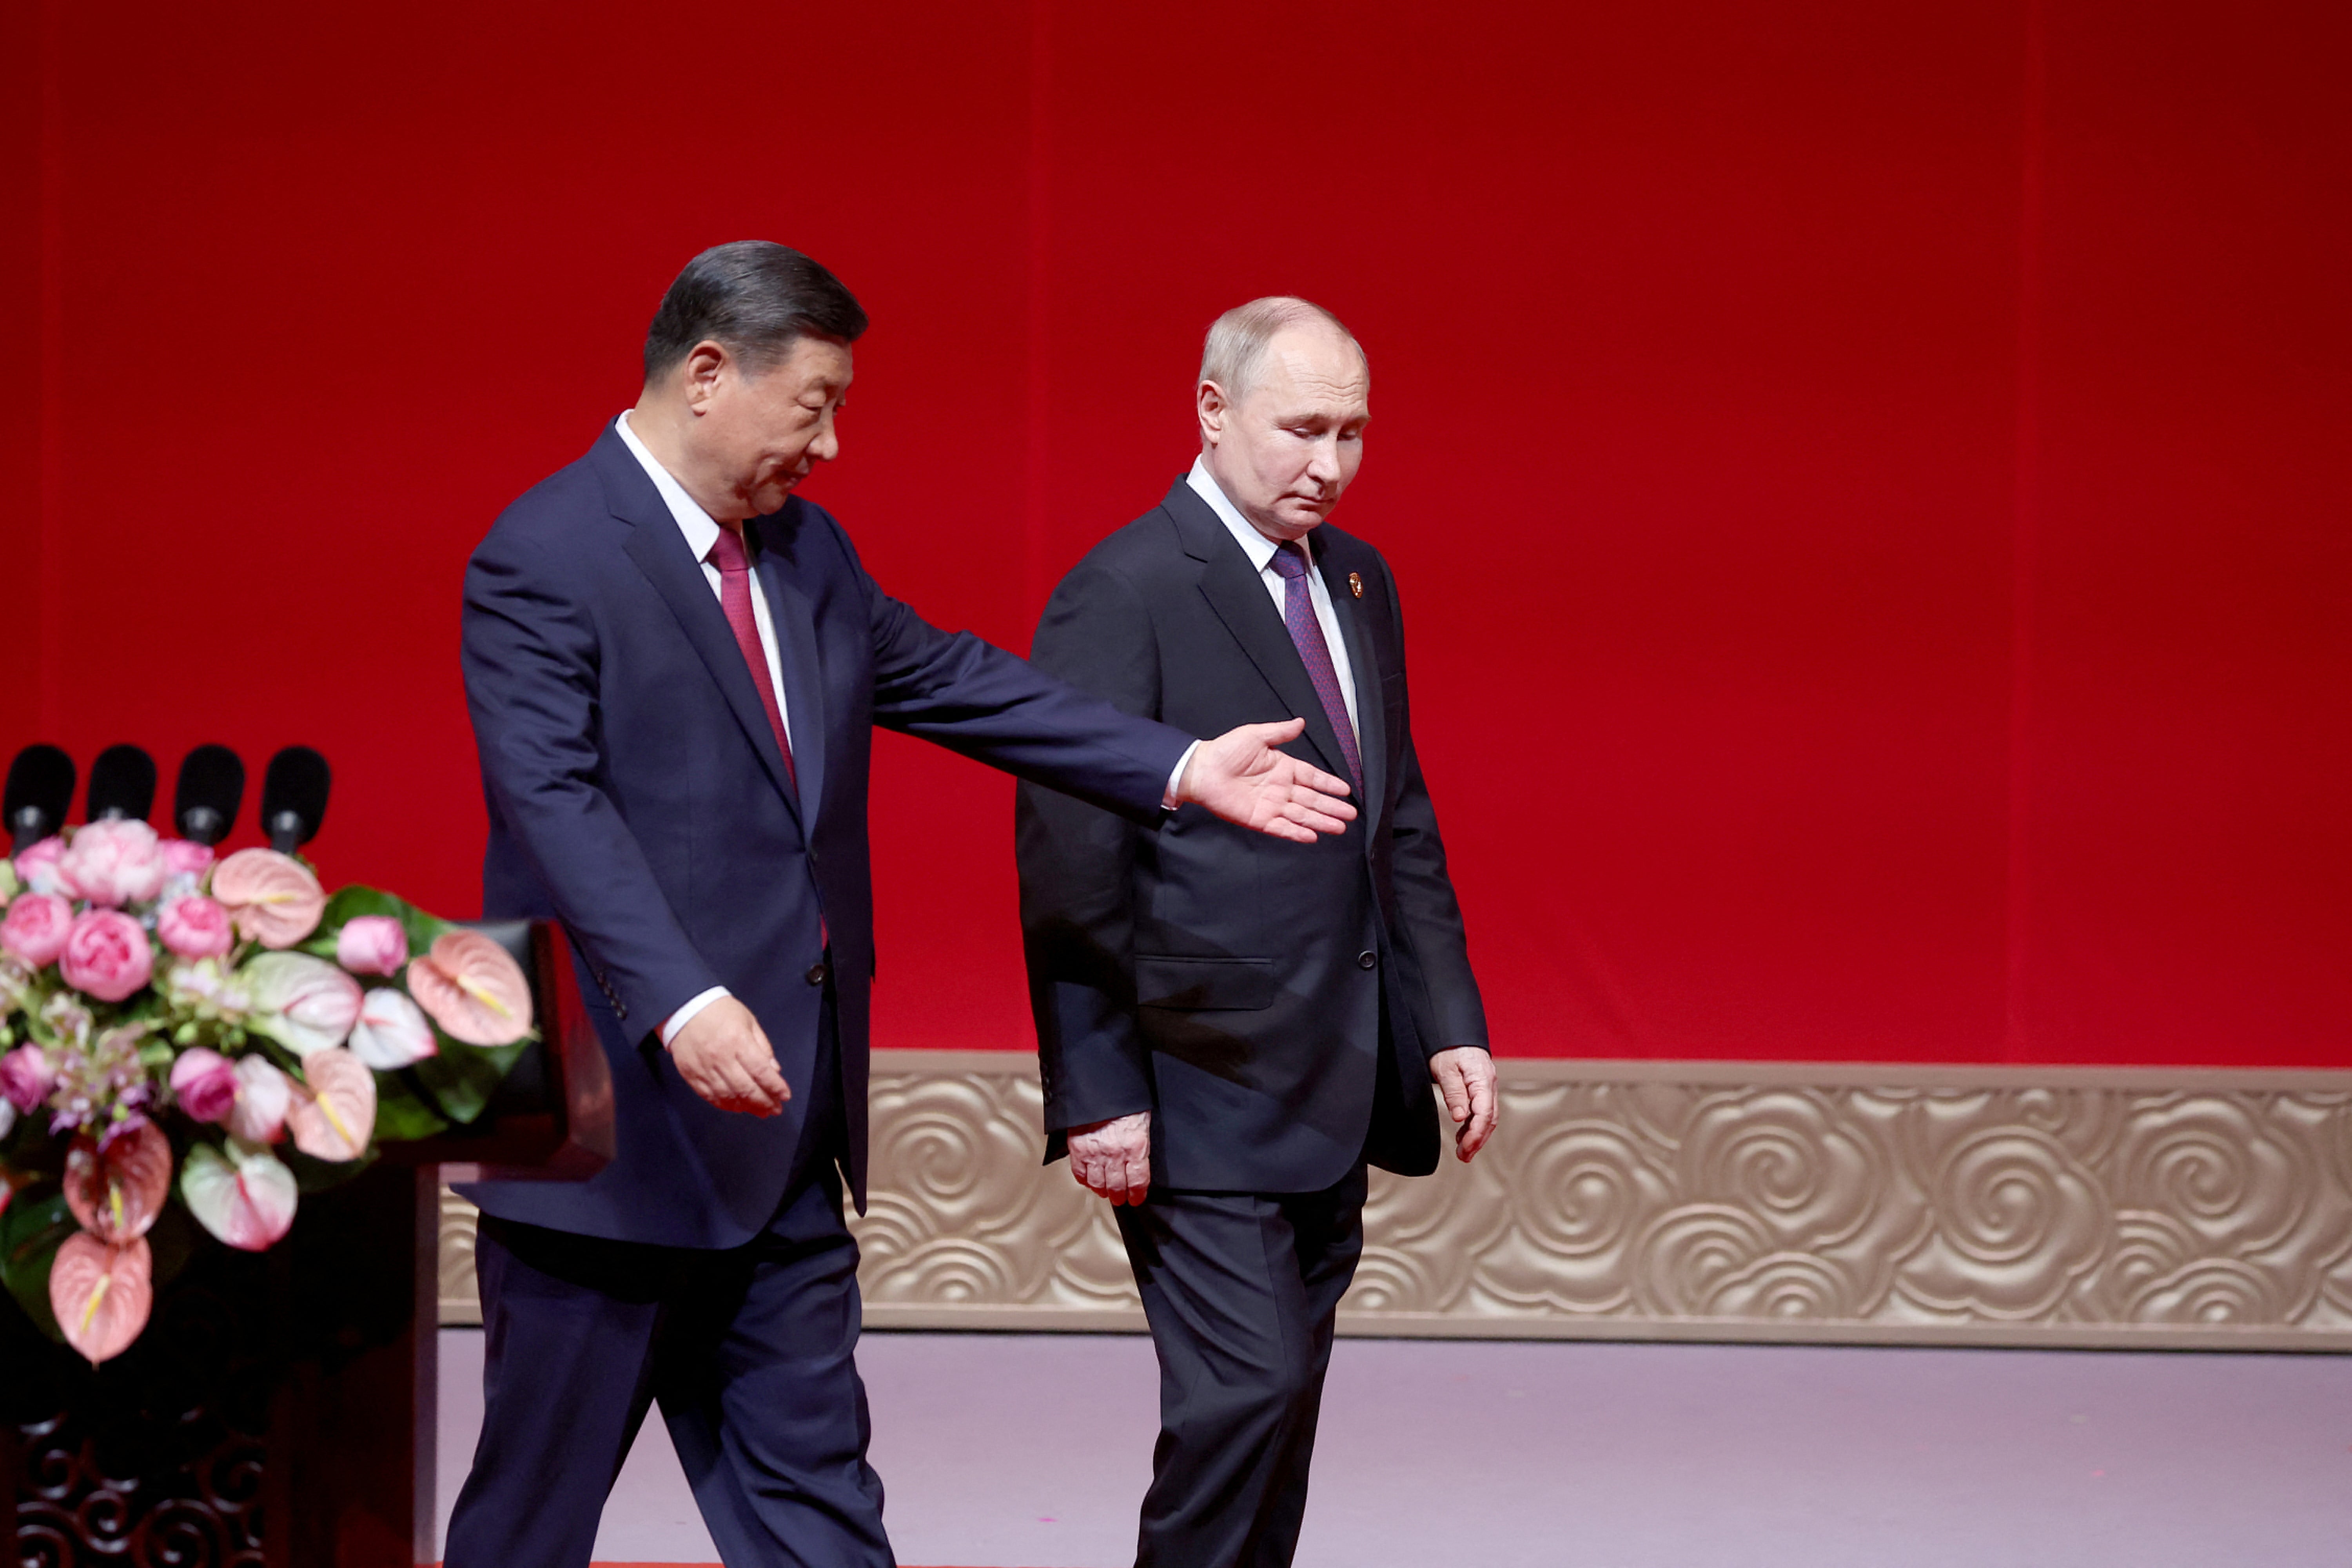 Vladimir Putin and Xi Jinping attend the gala celebration of 75 years of diplomatic relations